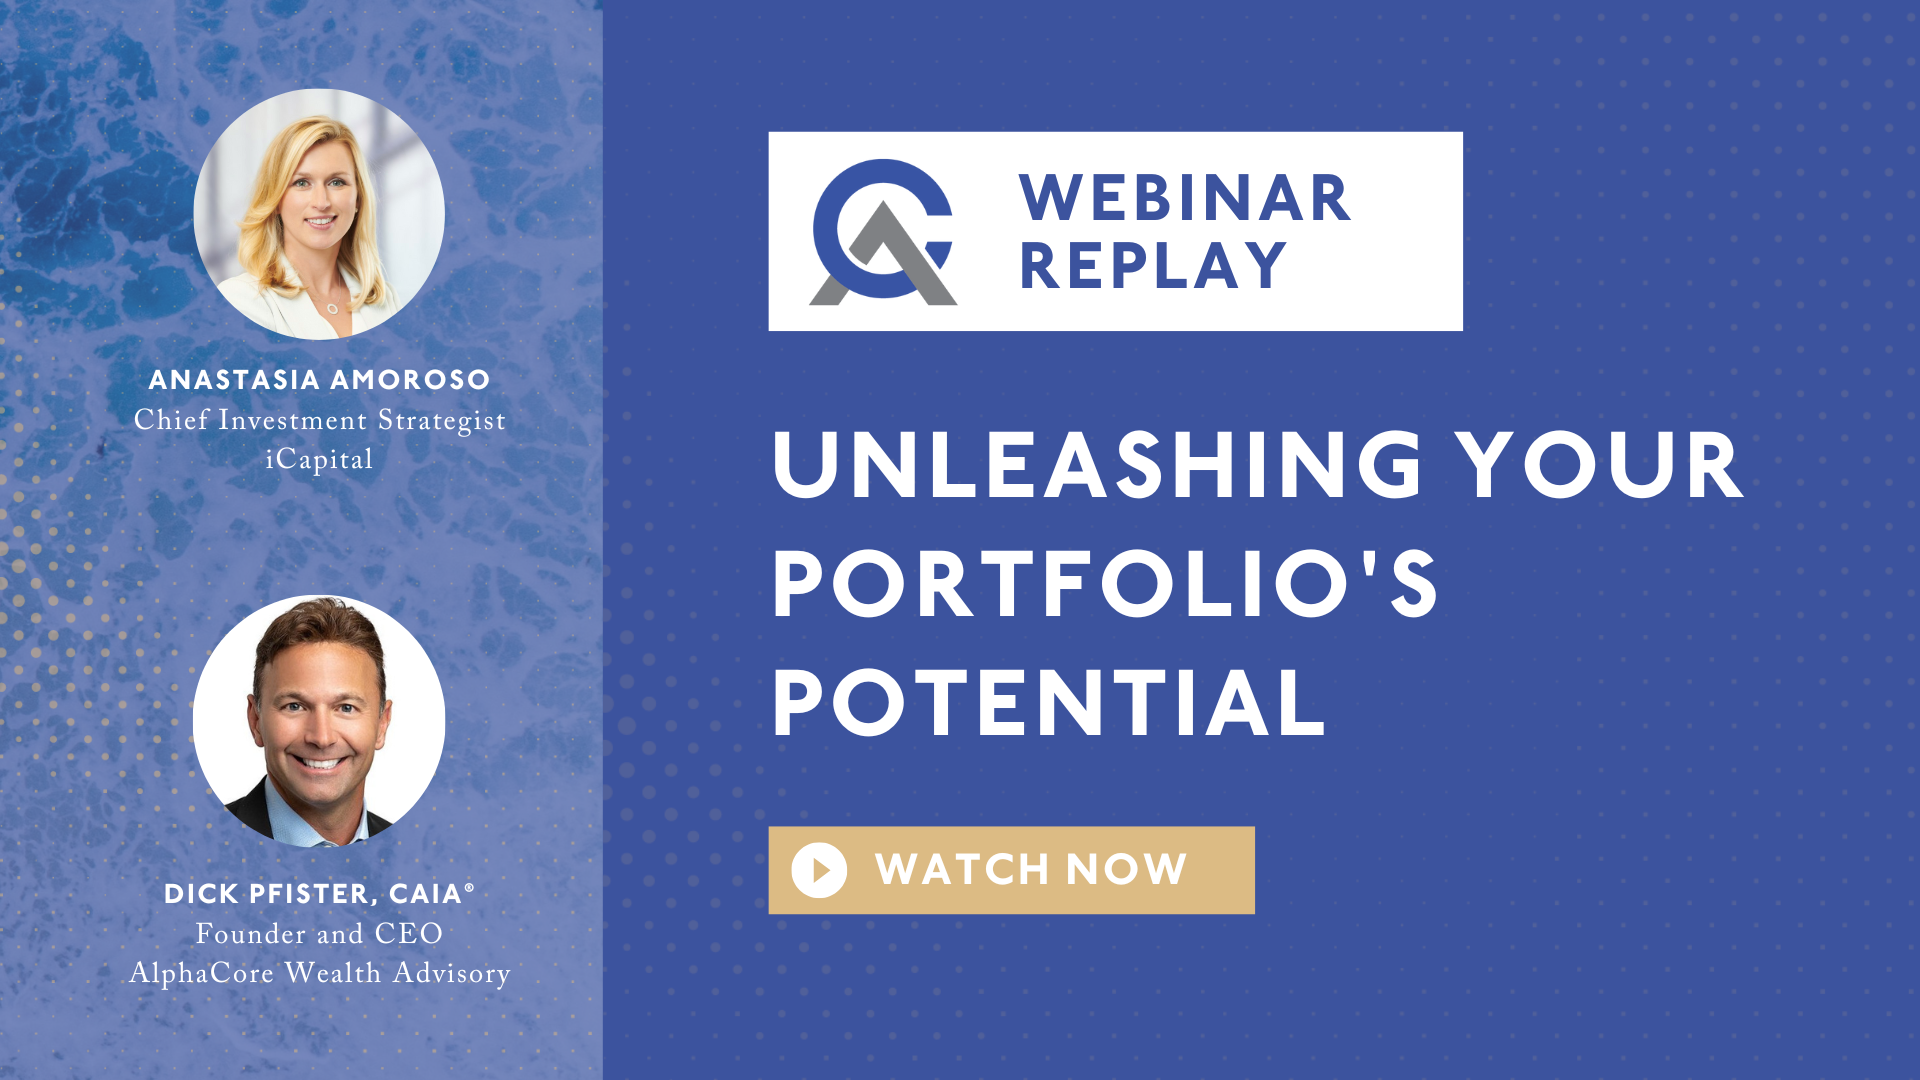 Webinar Replay: Unleashing Your Portfolio’s Potential with iCapital Chief Investment Strategist Anastasia Amoroso